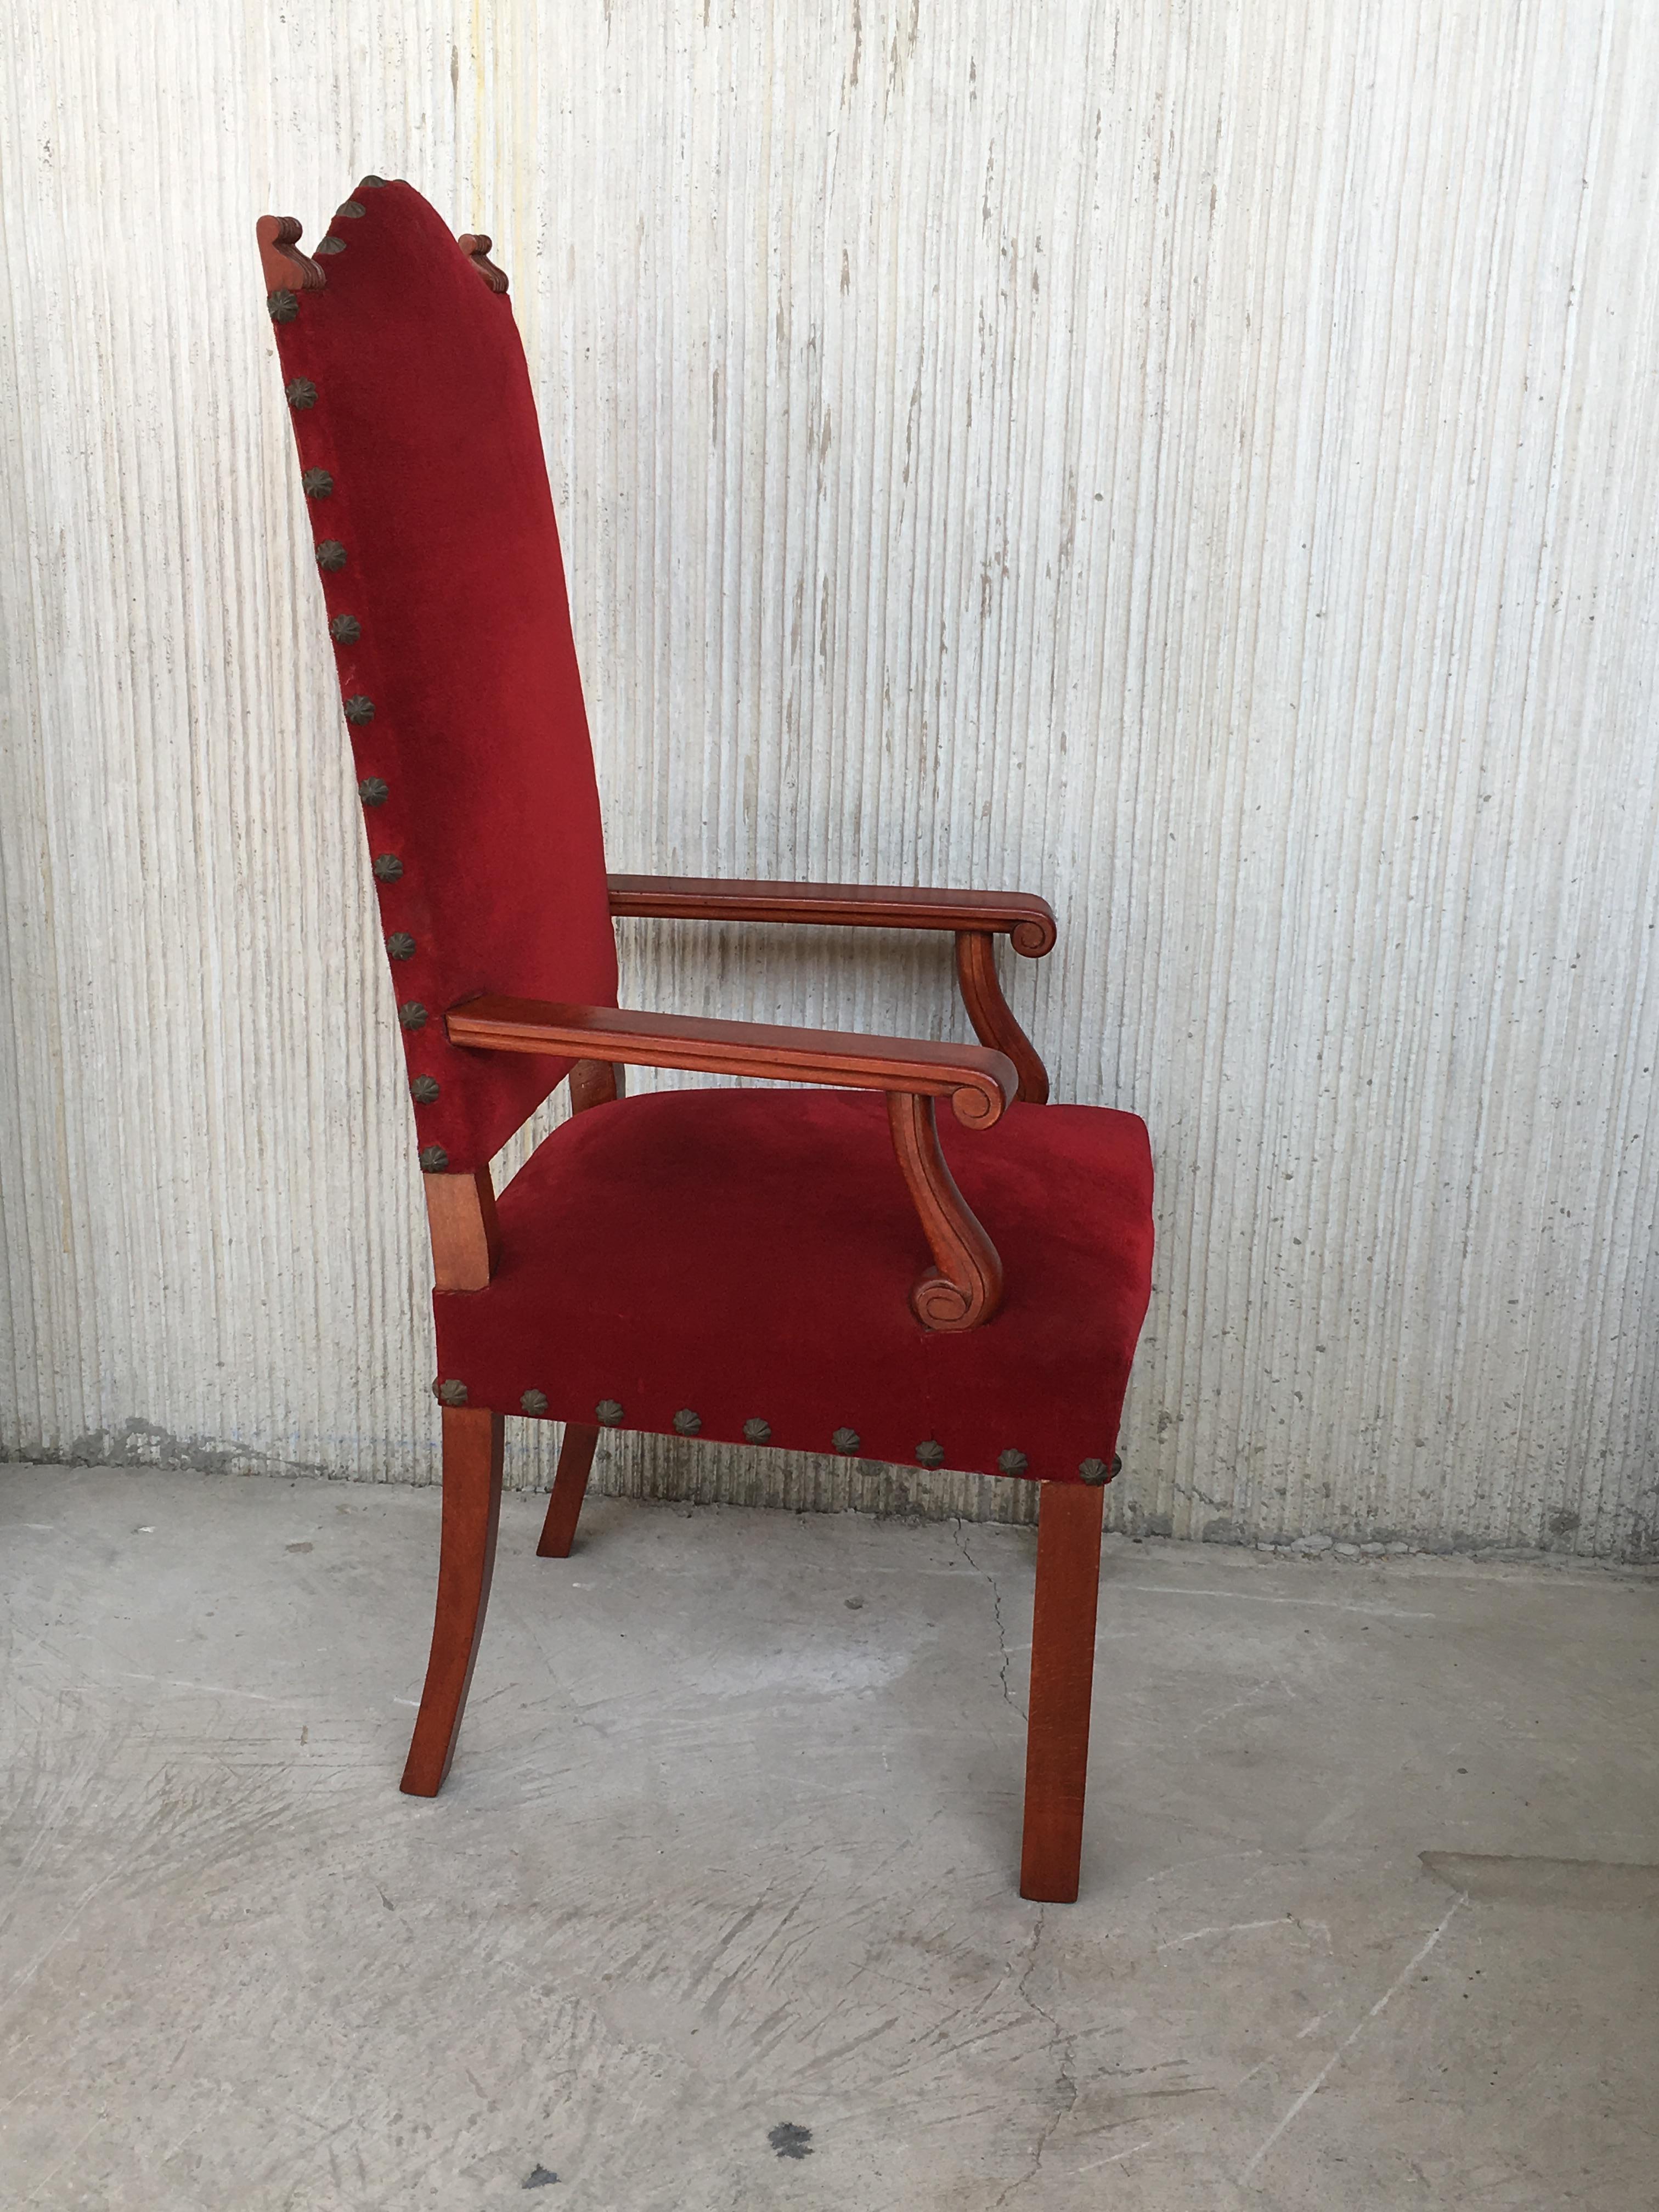 19th Century Spanish Revival High Back Armchair with Red Velvet Upholstery For Sale 1